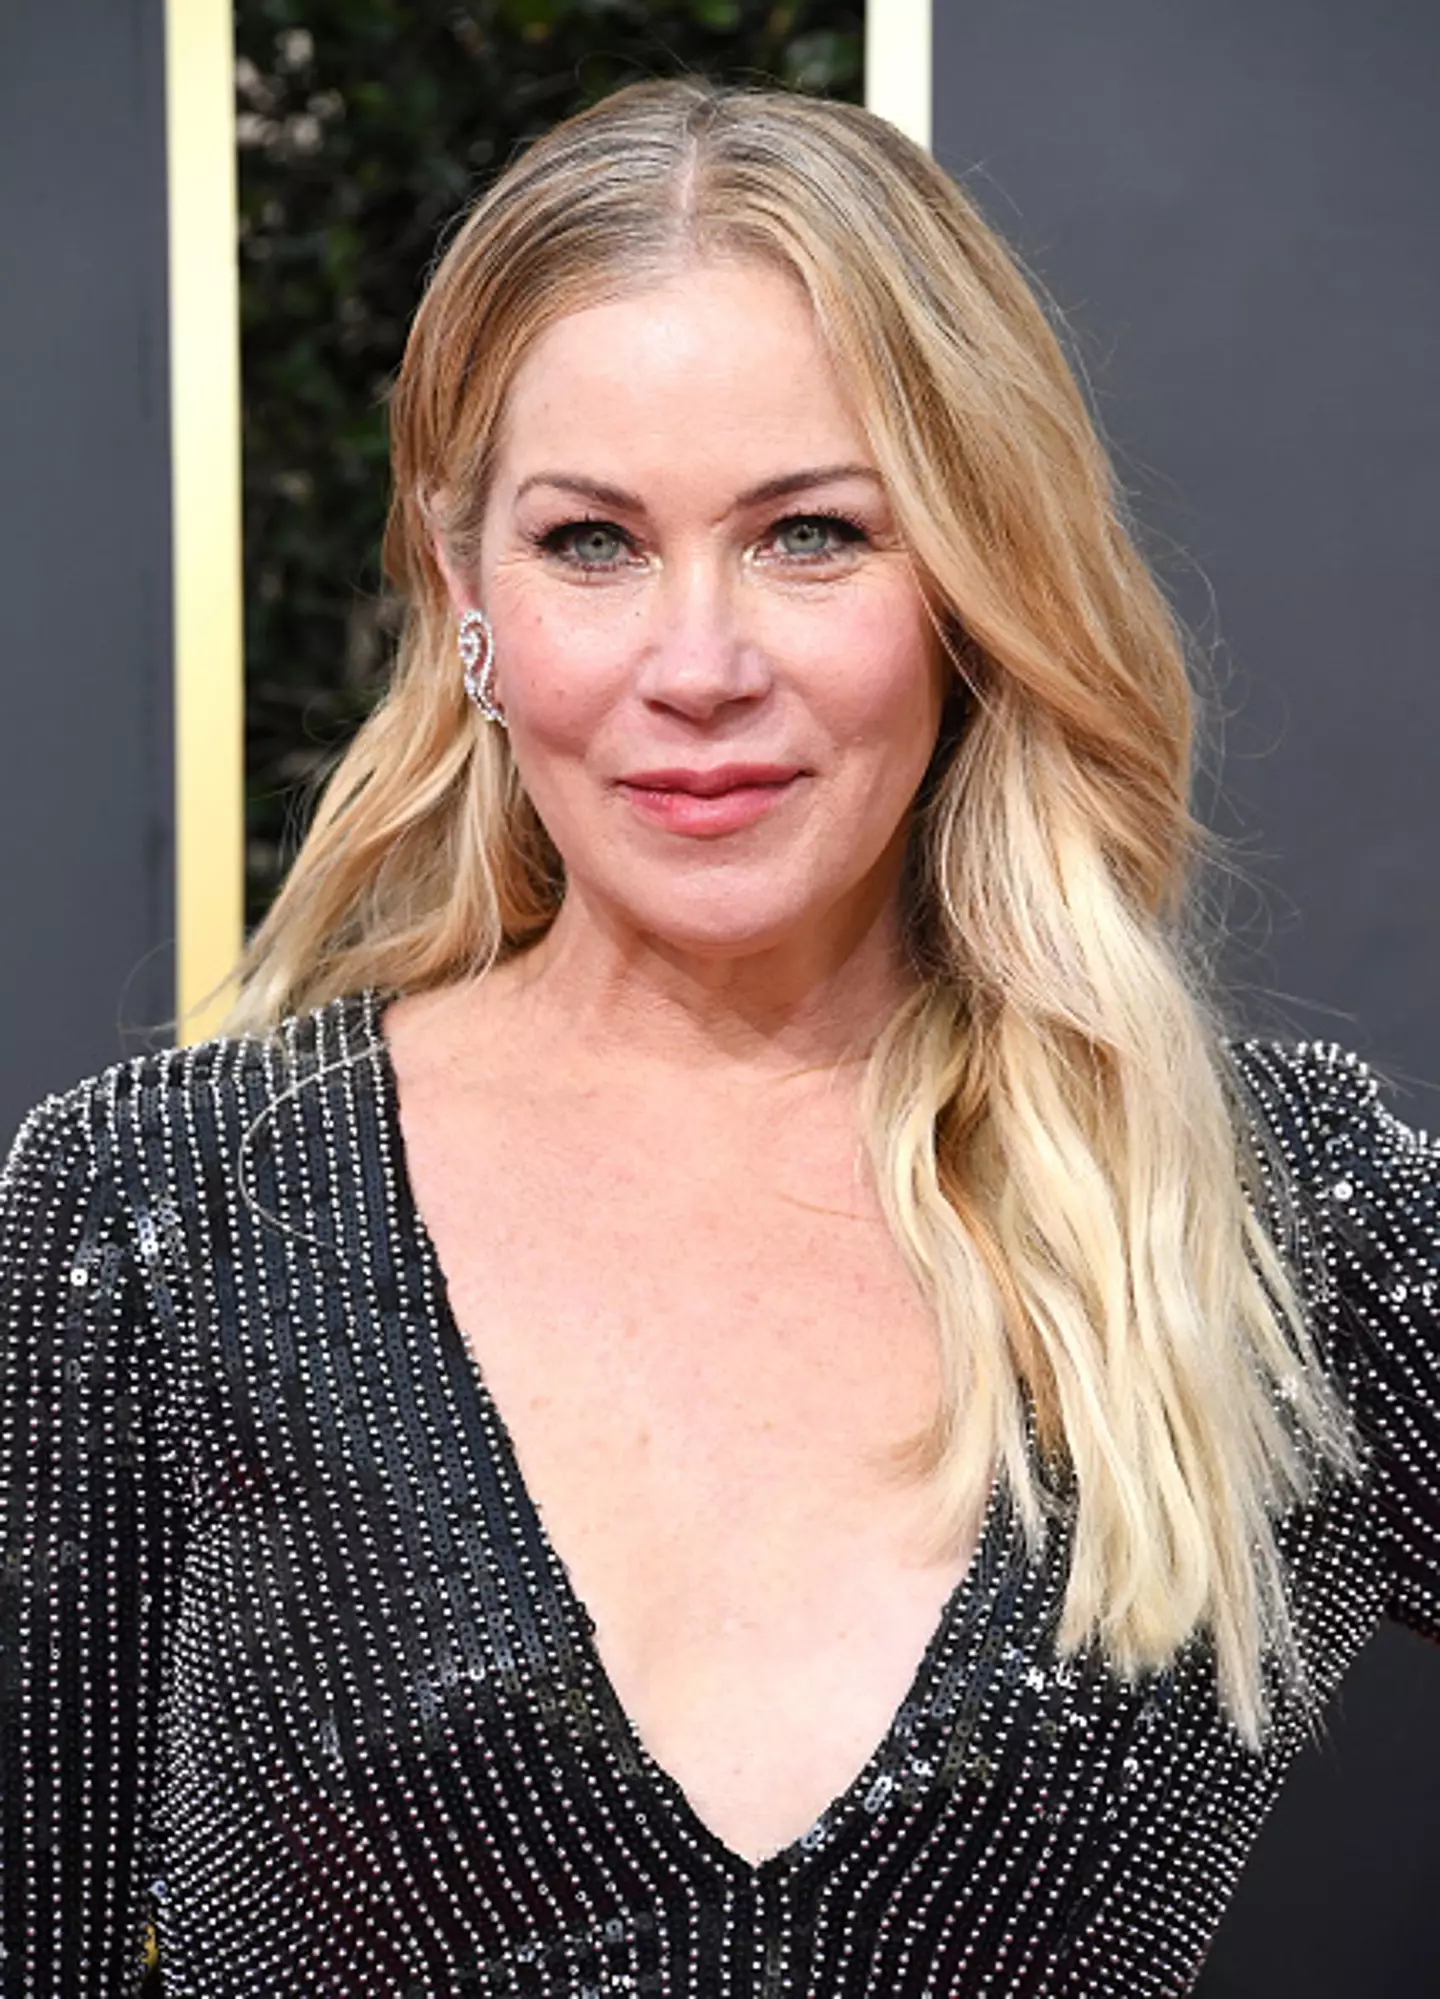 Christina Applegate was diagnosed with multiple sclerosis in 2021. (Steve Granitz/WireImage)